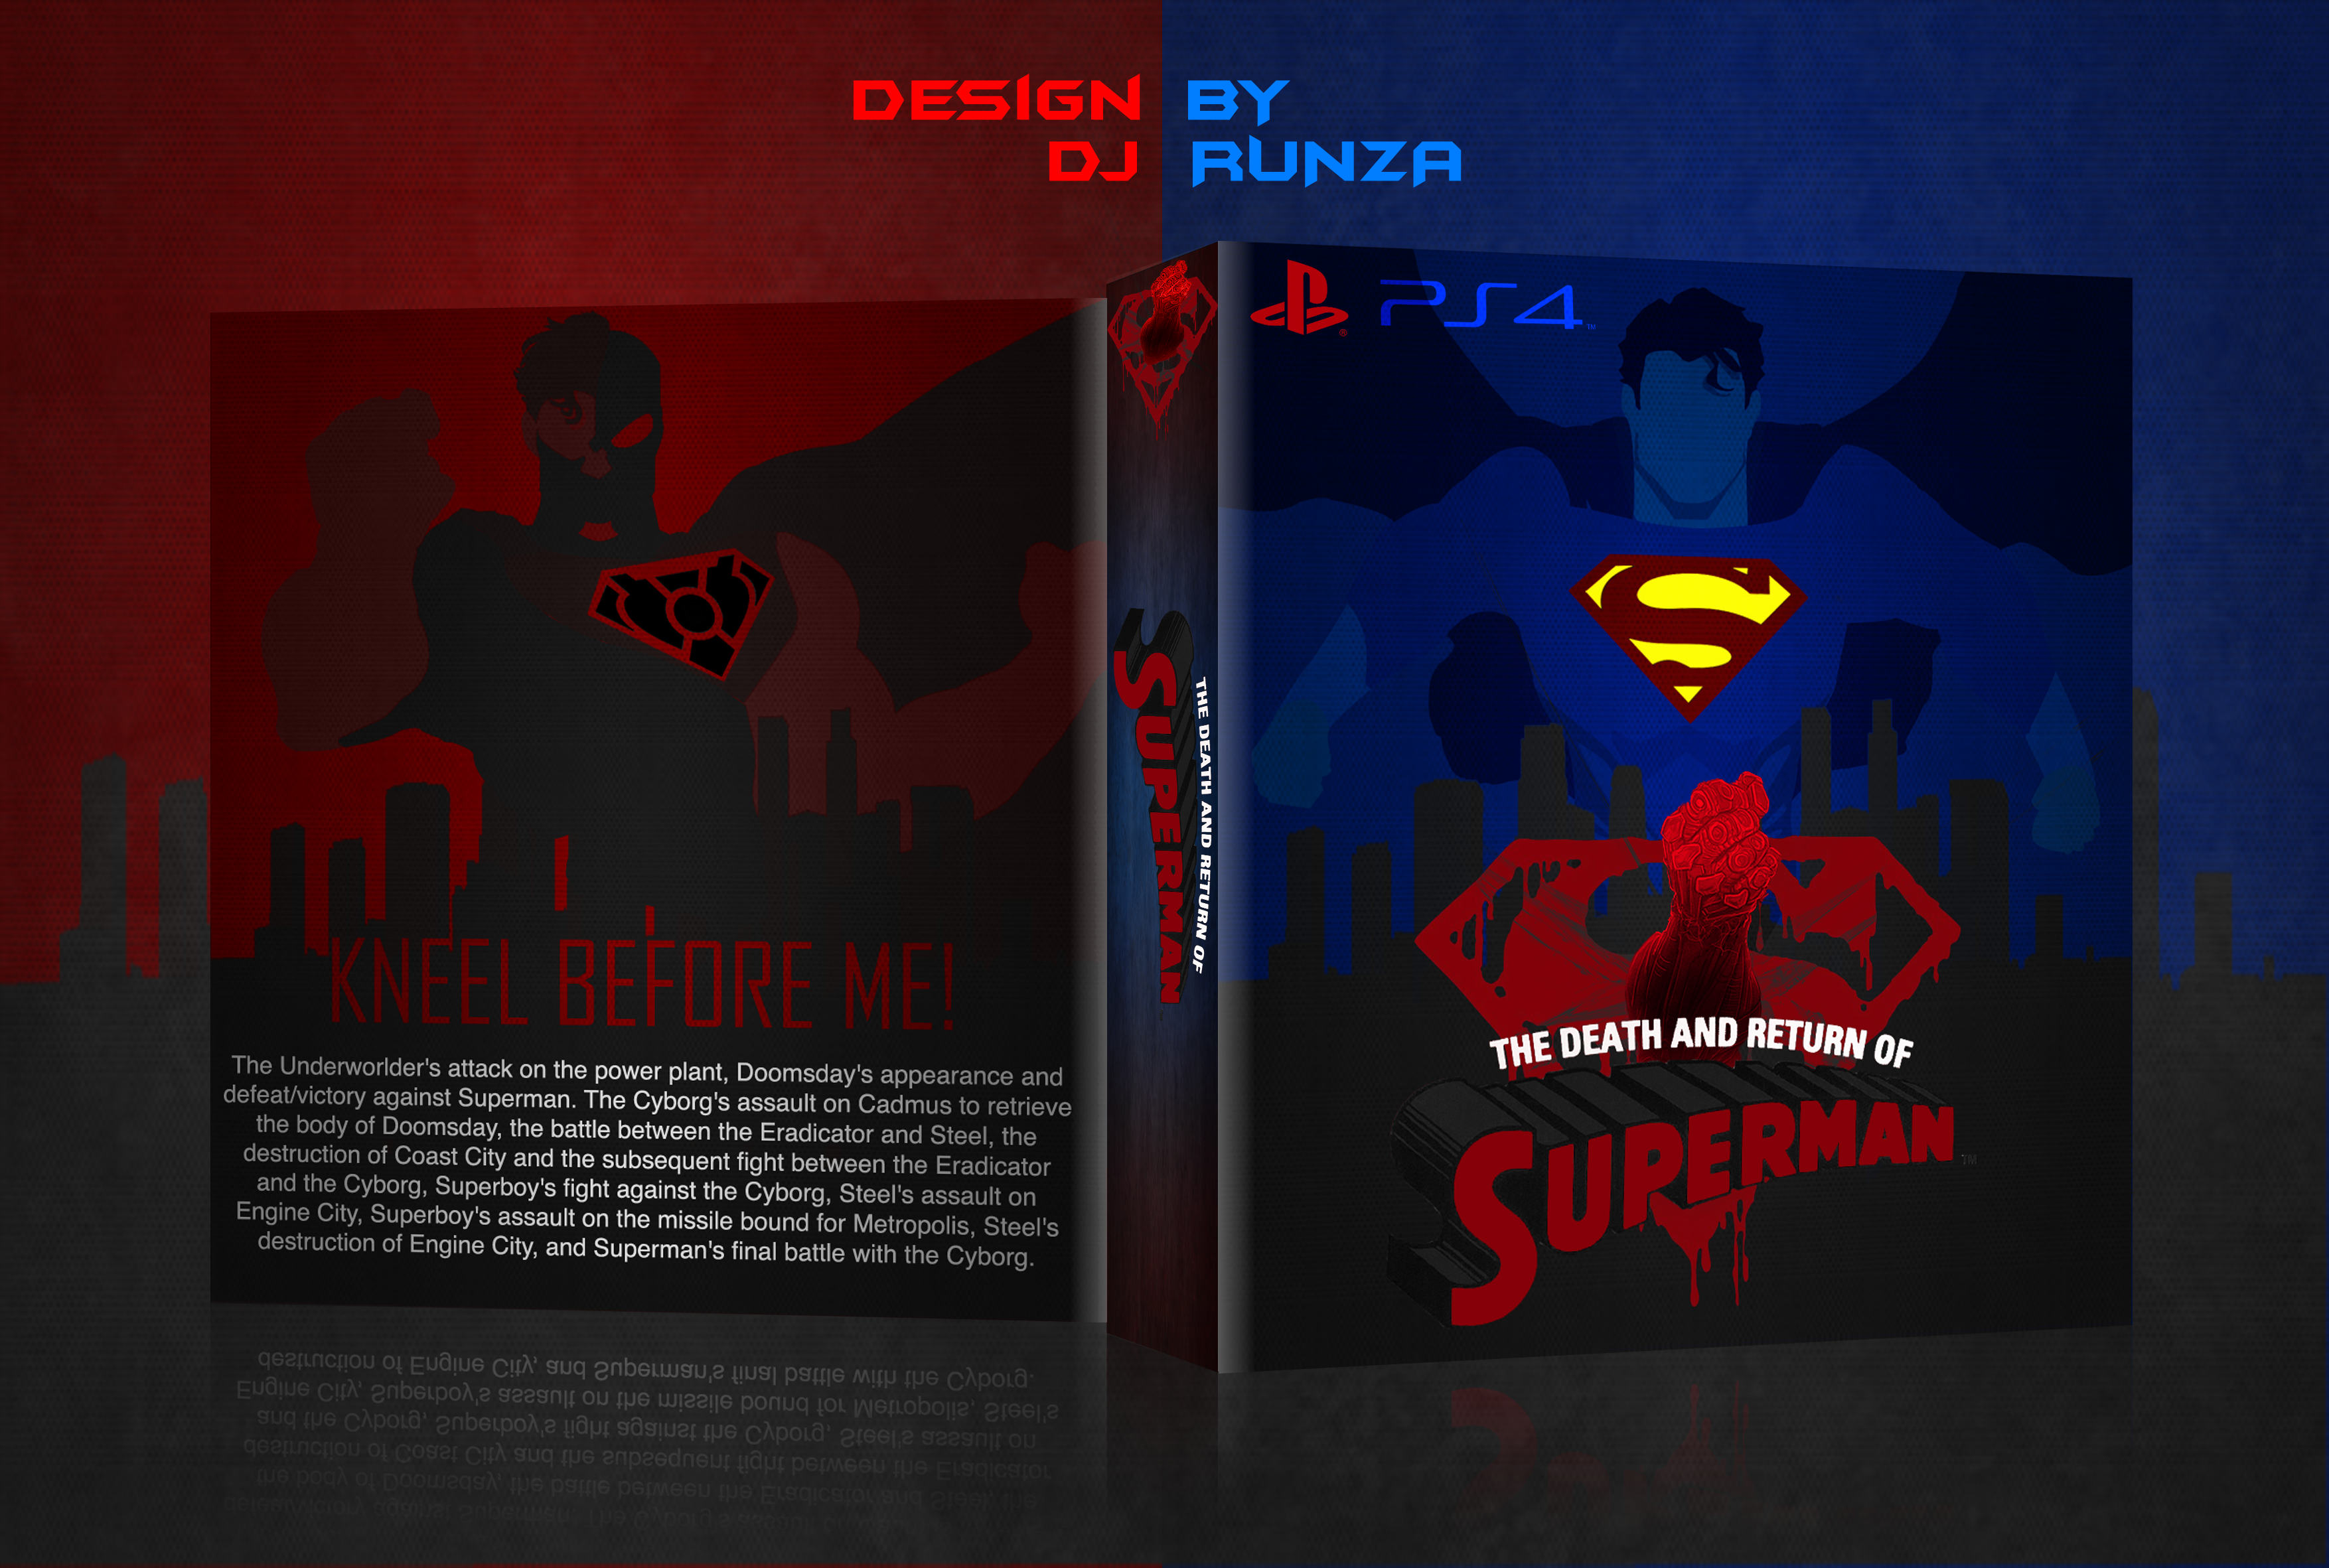 The Death And Return Of Superman box cover